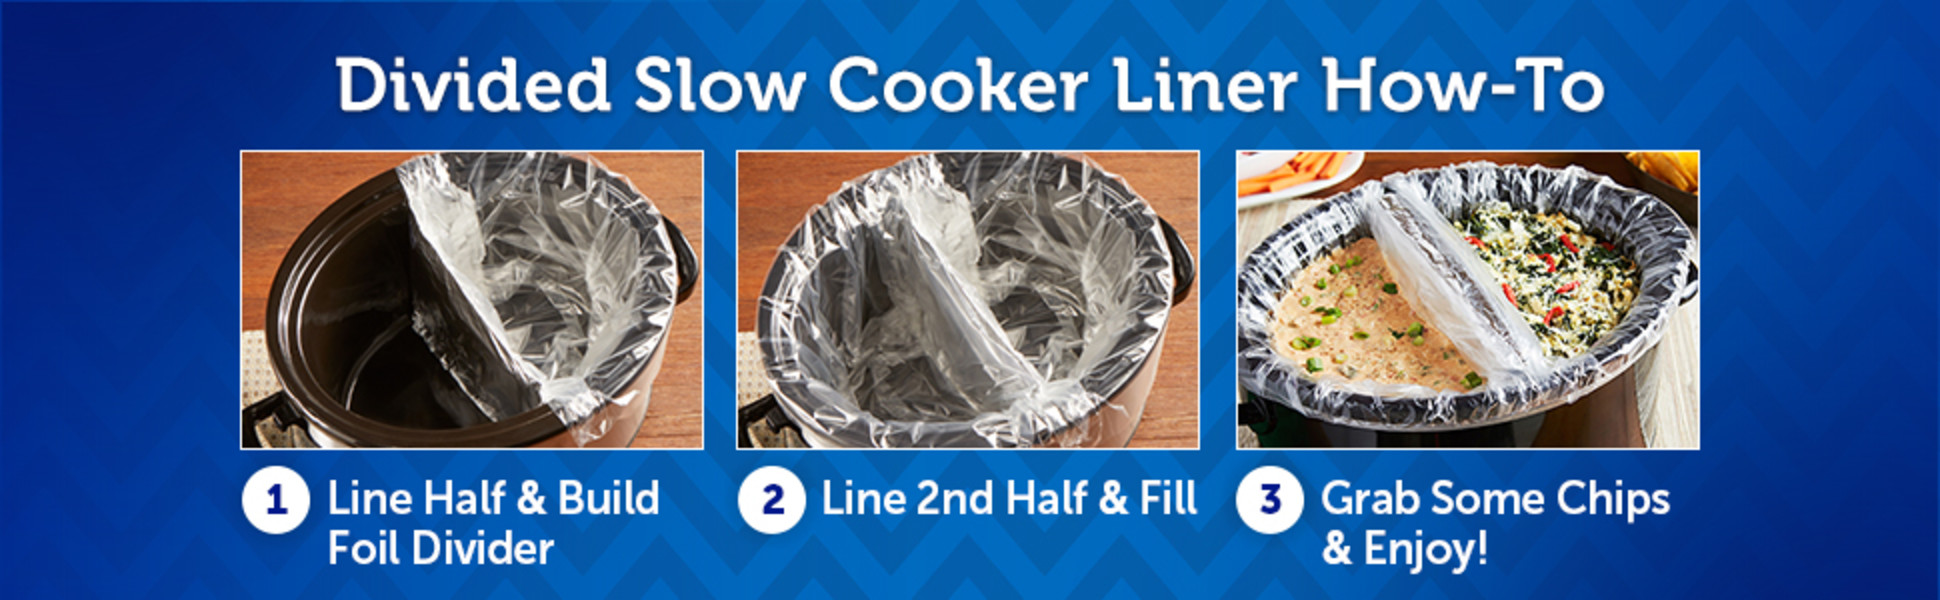 Home Select 10815-24 Slow Cooker Liners,3 quart